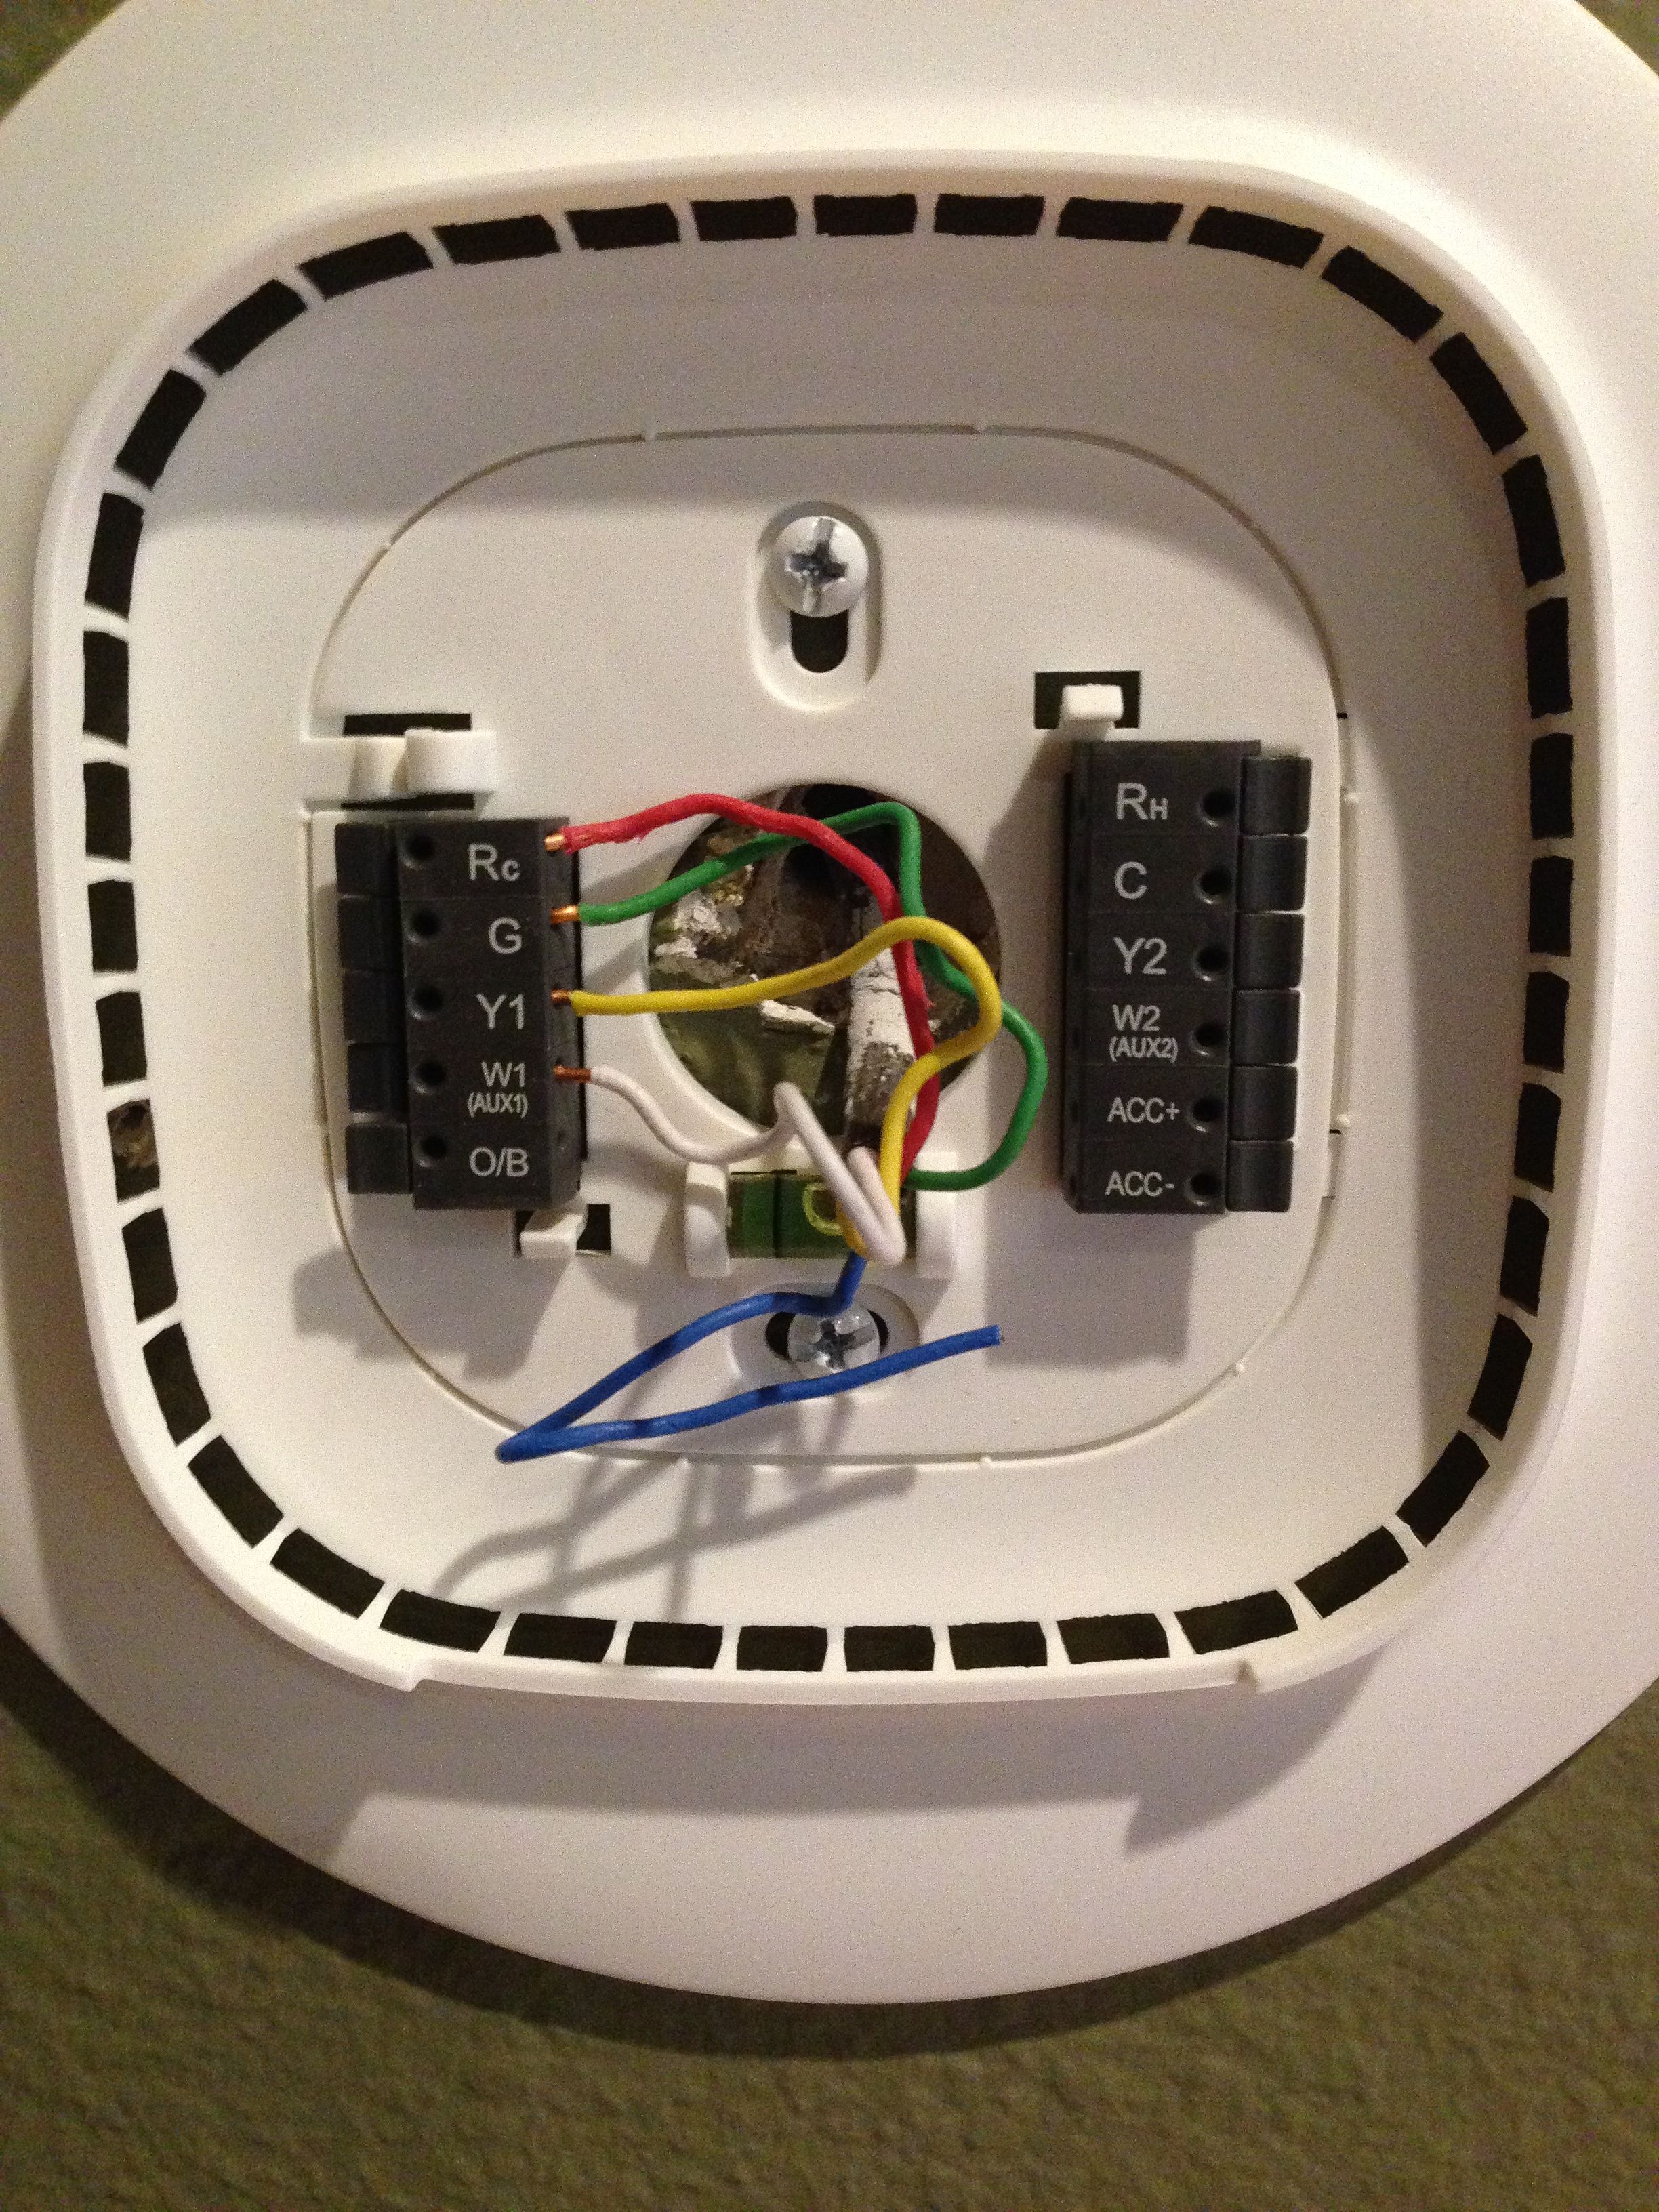 How do you test a heating and cooling thermostat?